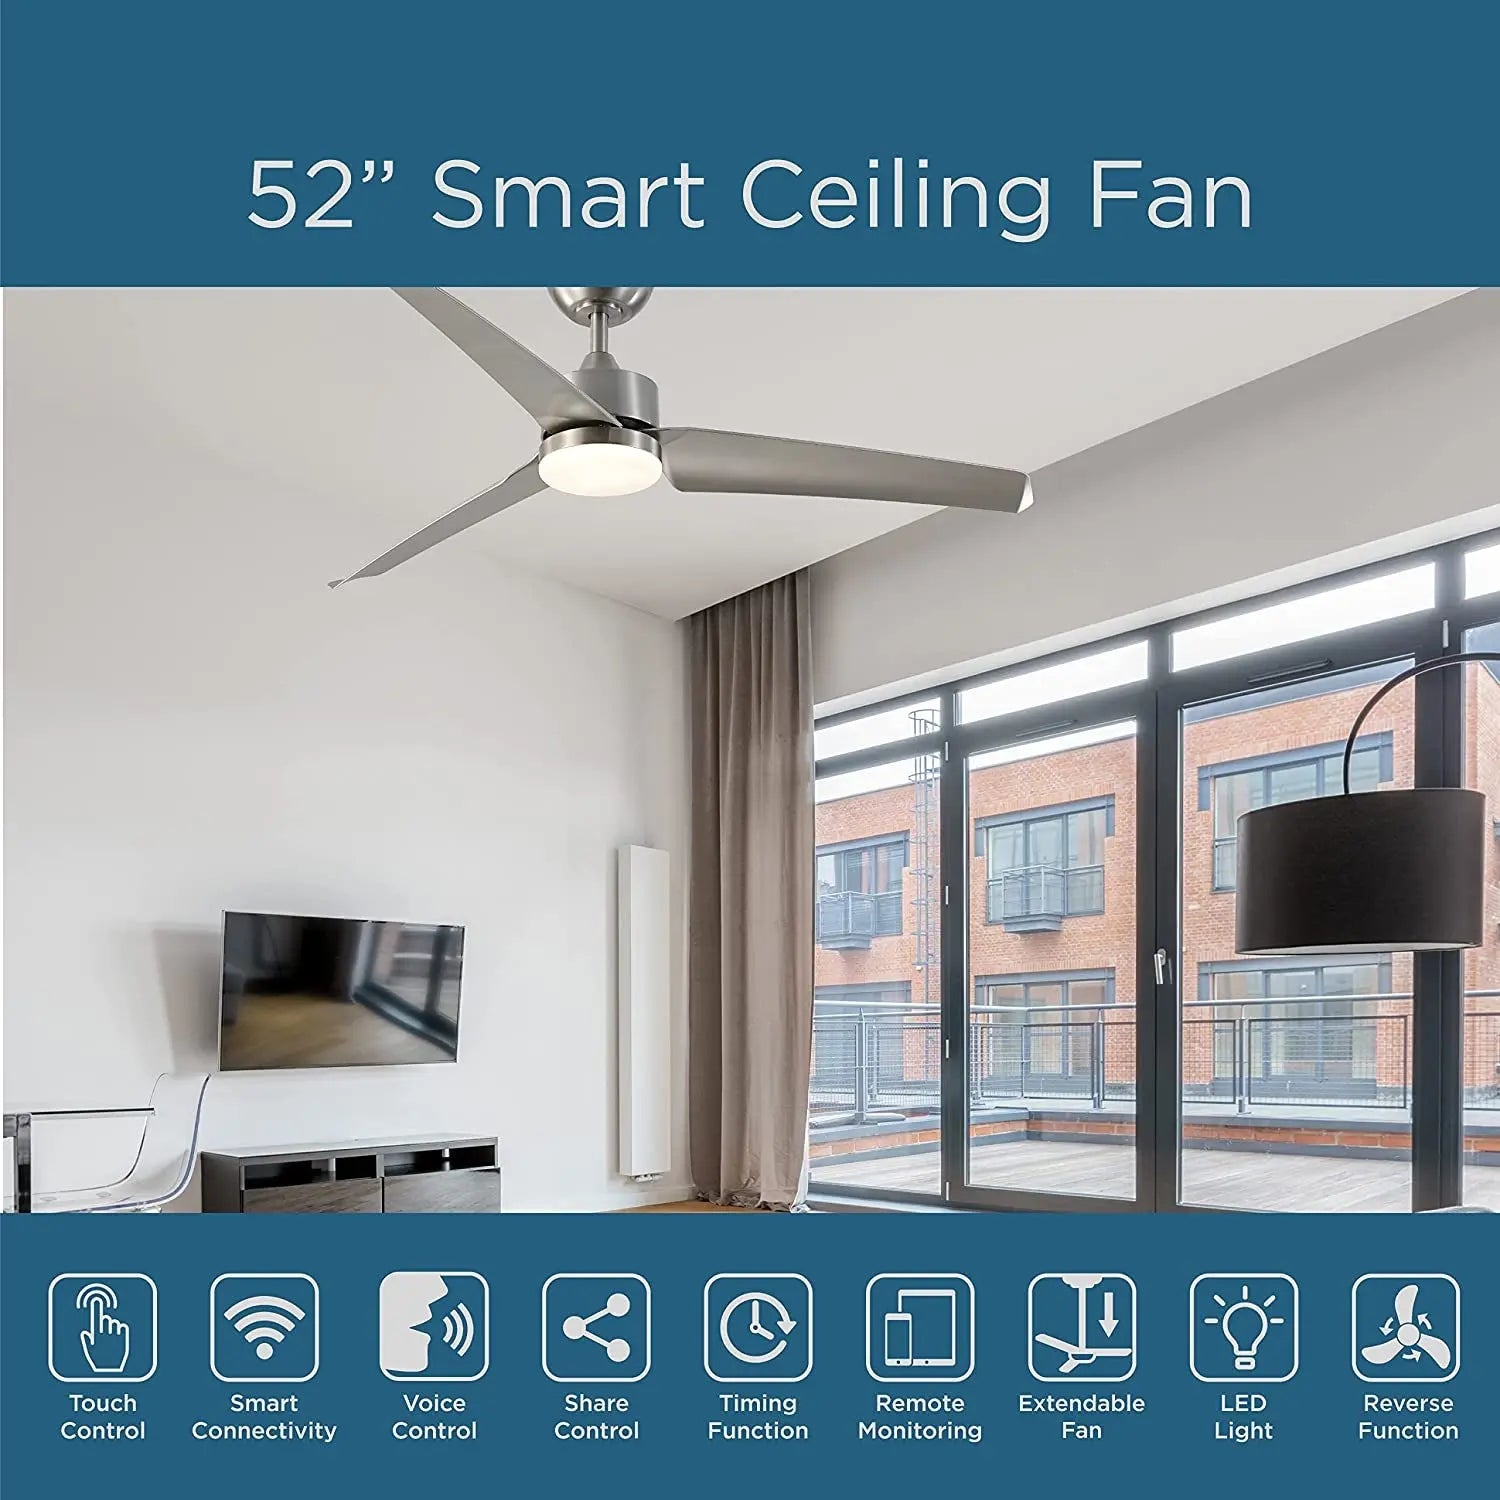 Smart Ceiling Fan 52" 3-Blade with LED Lights, High-Powered Quiet Fan with 6 Speeds and Reverse Function, Wifi Control Fan with 3 Color Temperatures, Works with Tuya Smart, Alexa and Google